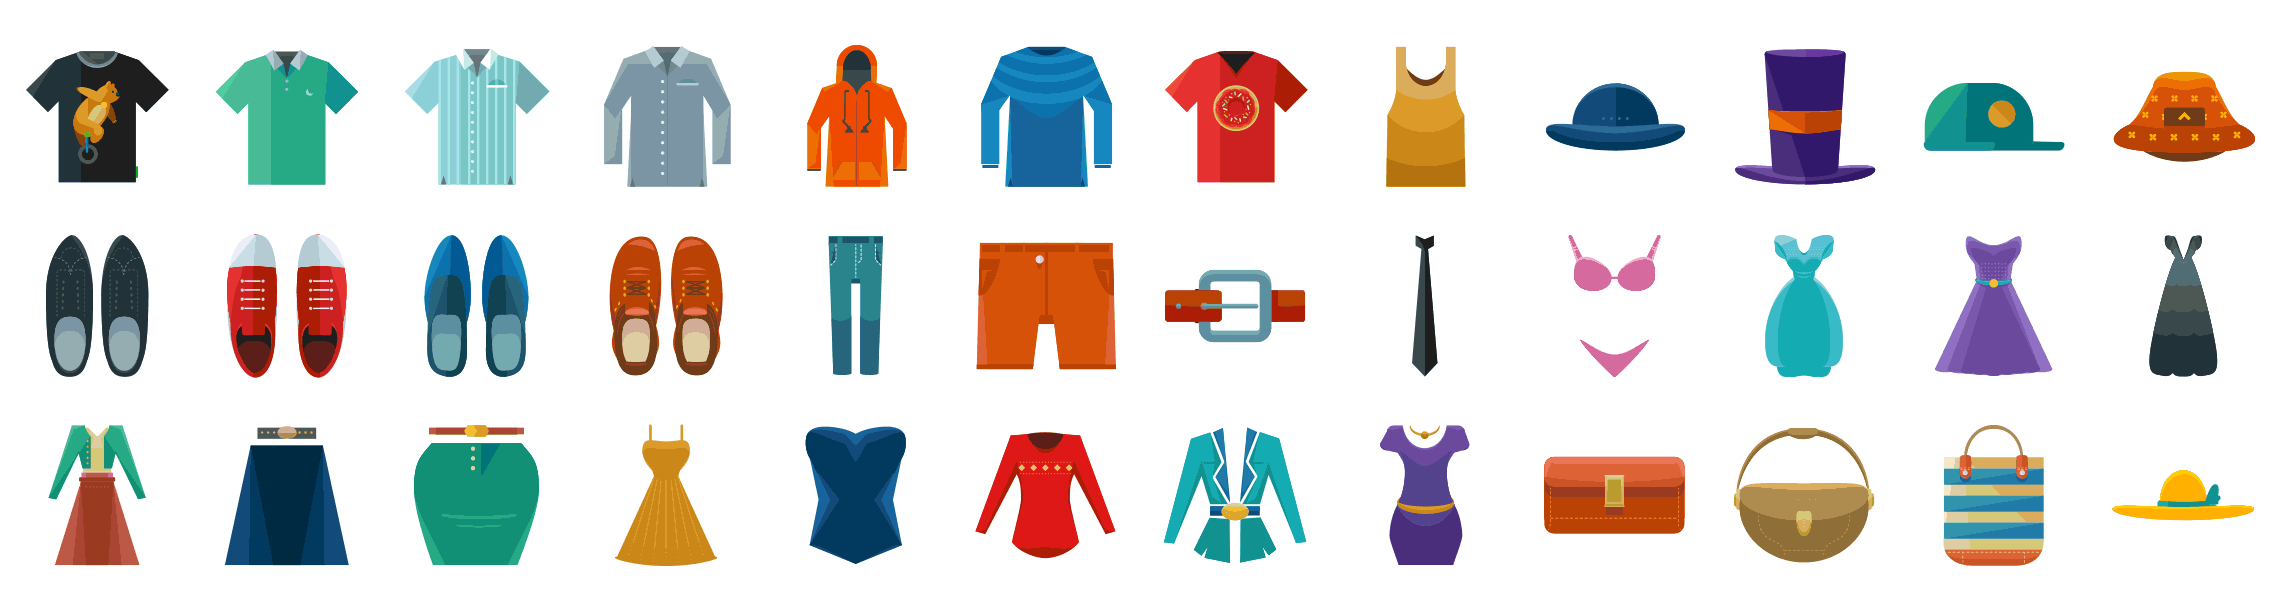 Clothes-flat-icons